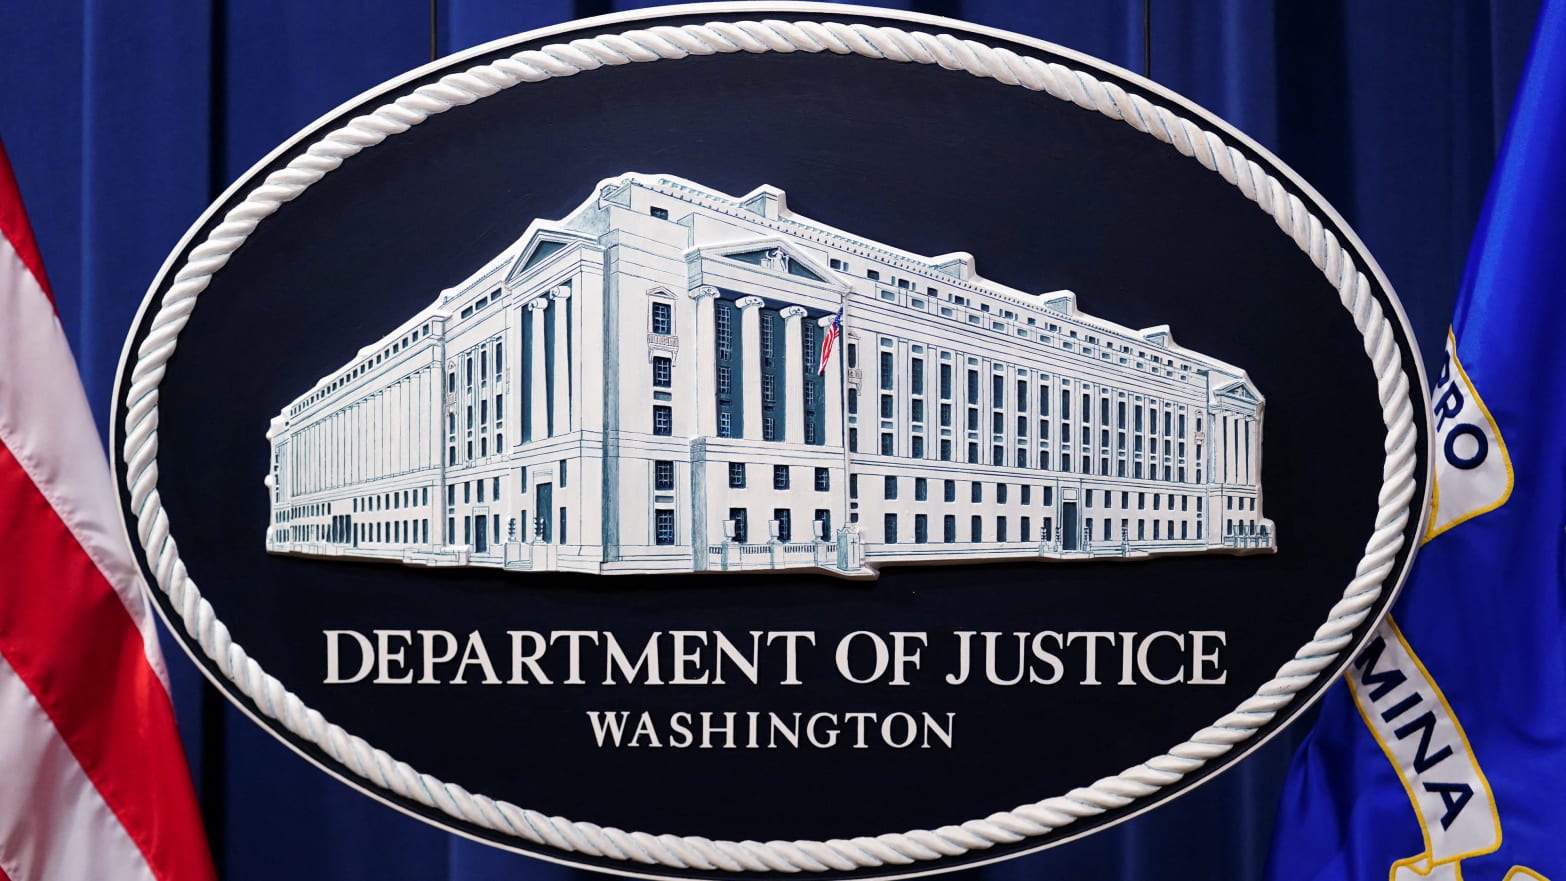 The Department of Justice logo as a backdrop for a press conference.